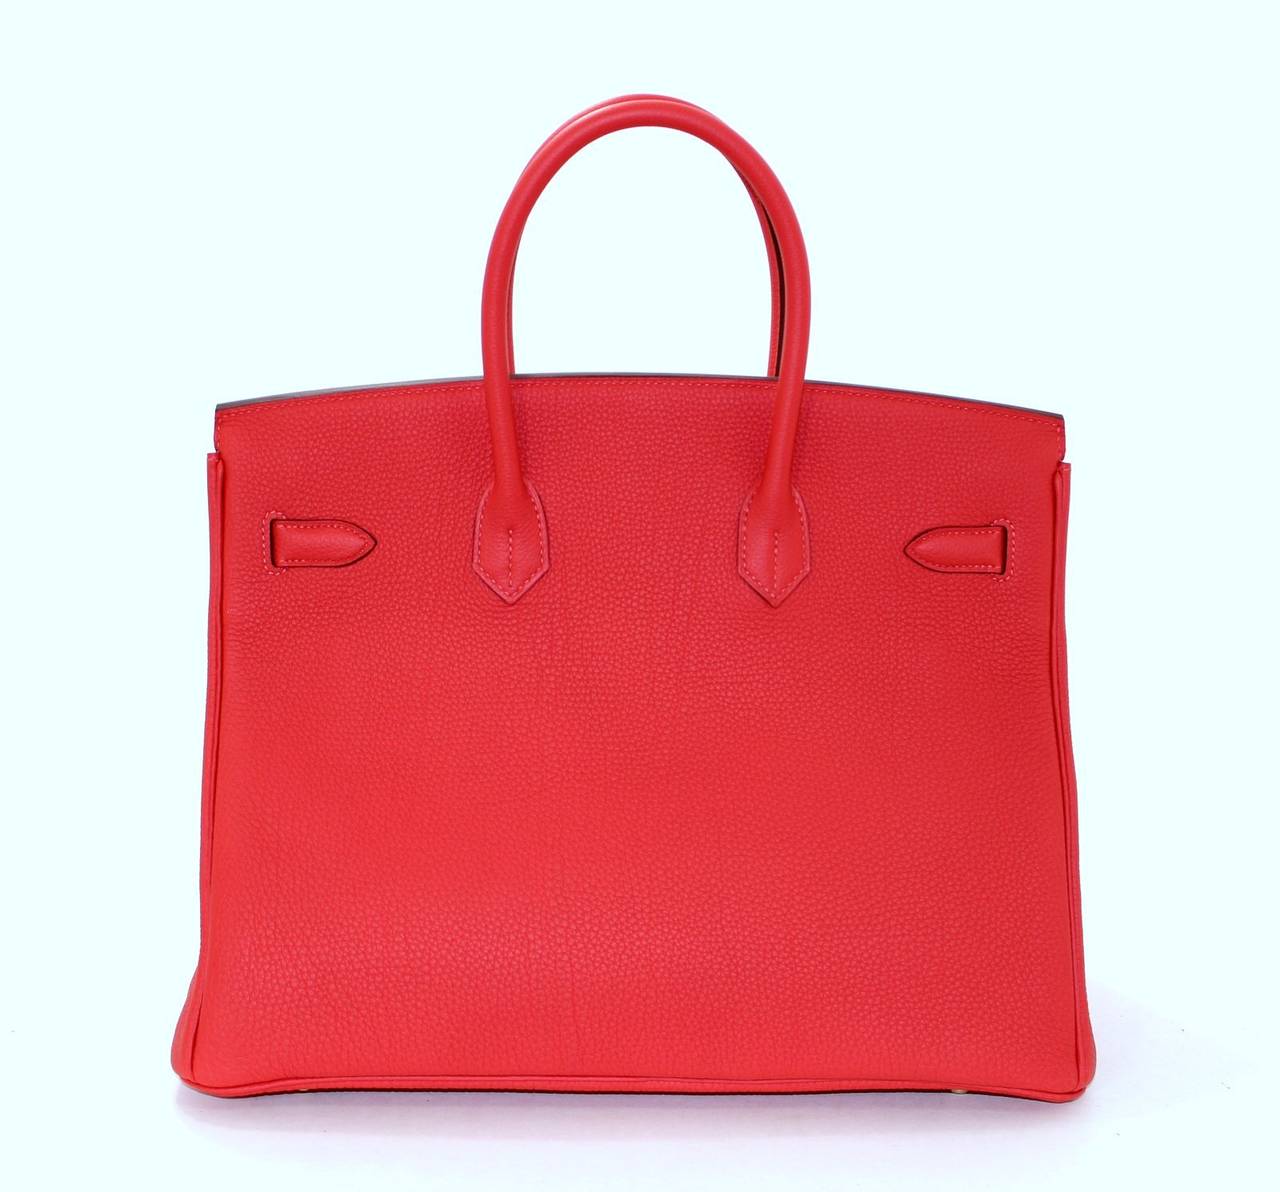 Pristine, store fresh condition (plastic on hardware) Hermès Birkin Bag in Rouge Pivoine Togo, 35 cm size.   Crafted by hand and considered by many as the epitome of luxury items, Birkins are extremely difficult to get. Scratch resistant and richly